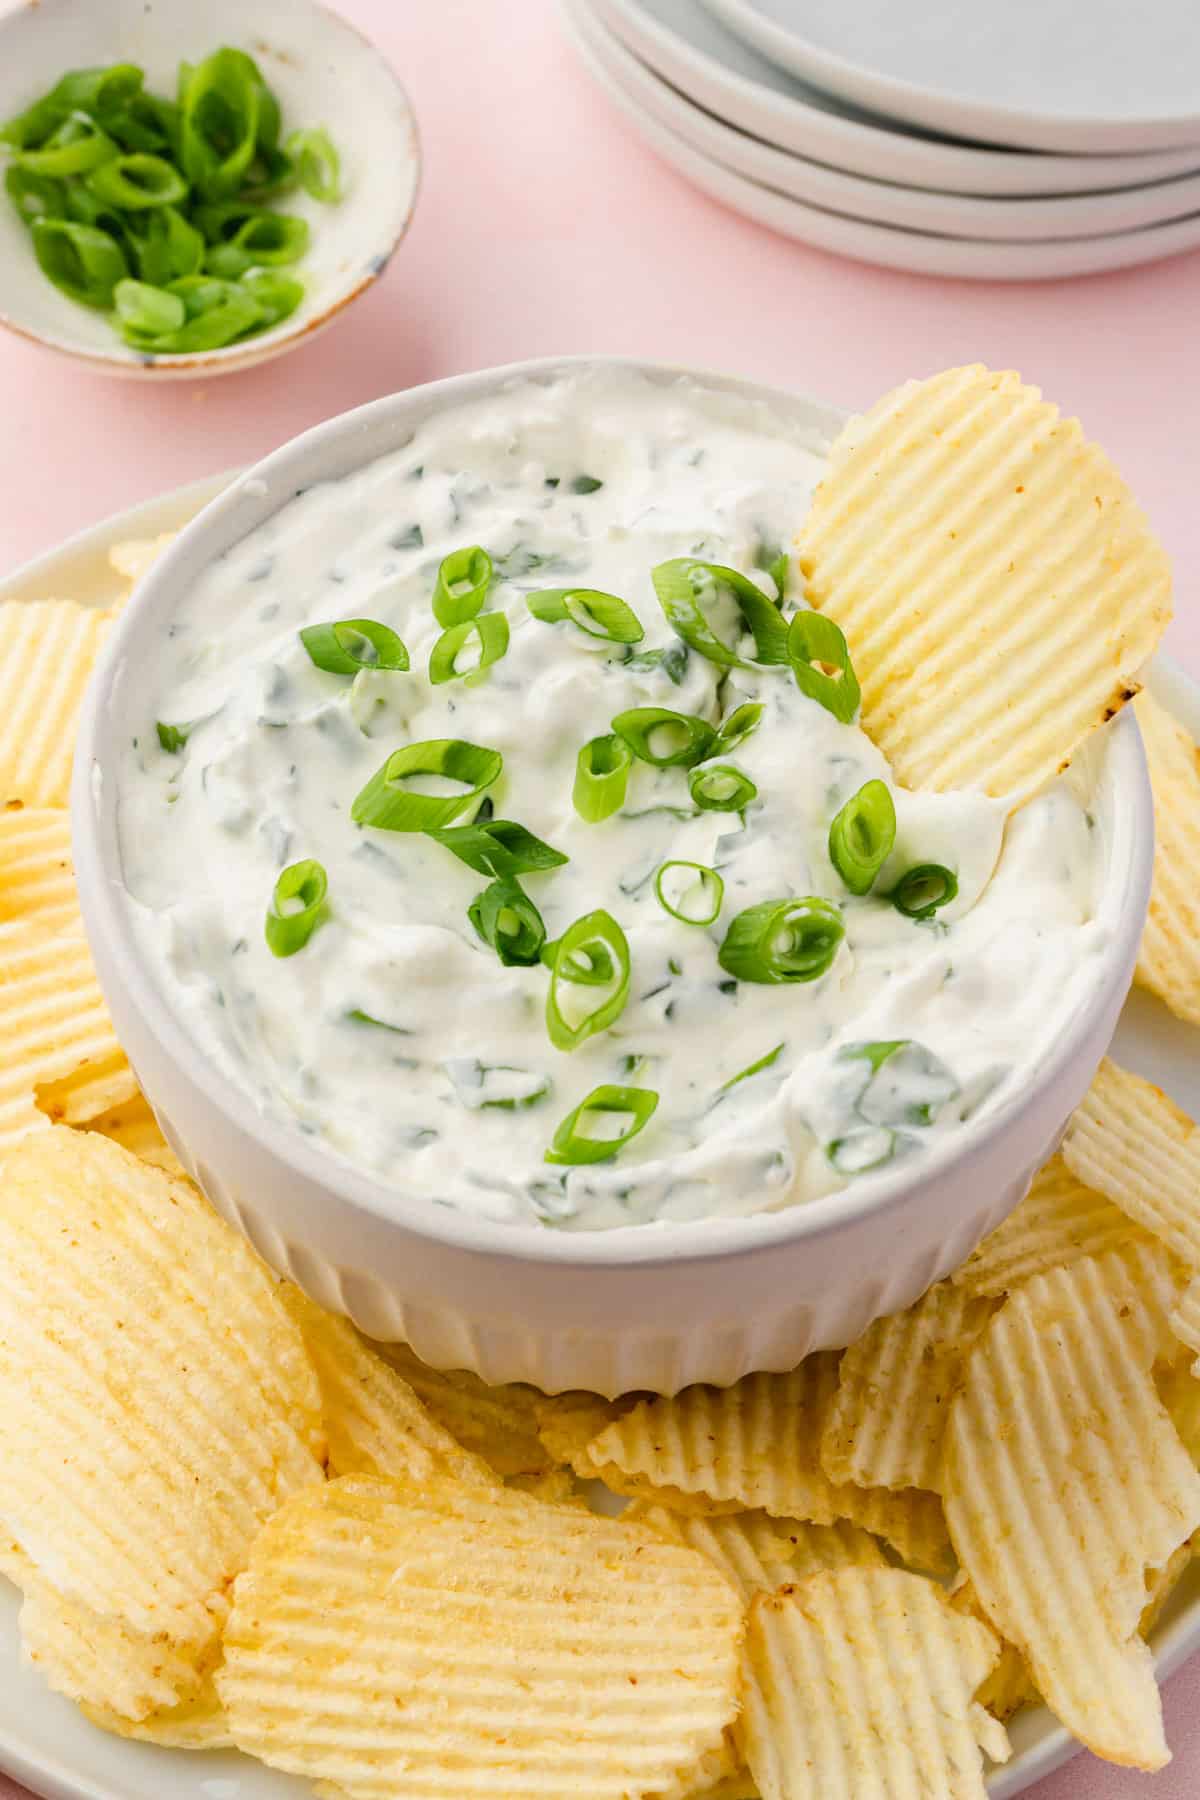 A bowl of green onion dip on a plate of Ruffle potato chips with a bowl of sliced green onions and a stack of plates in the background.